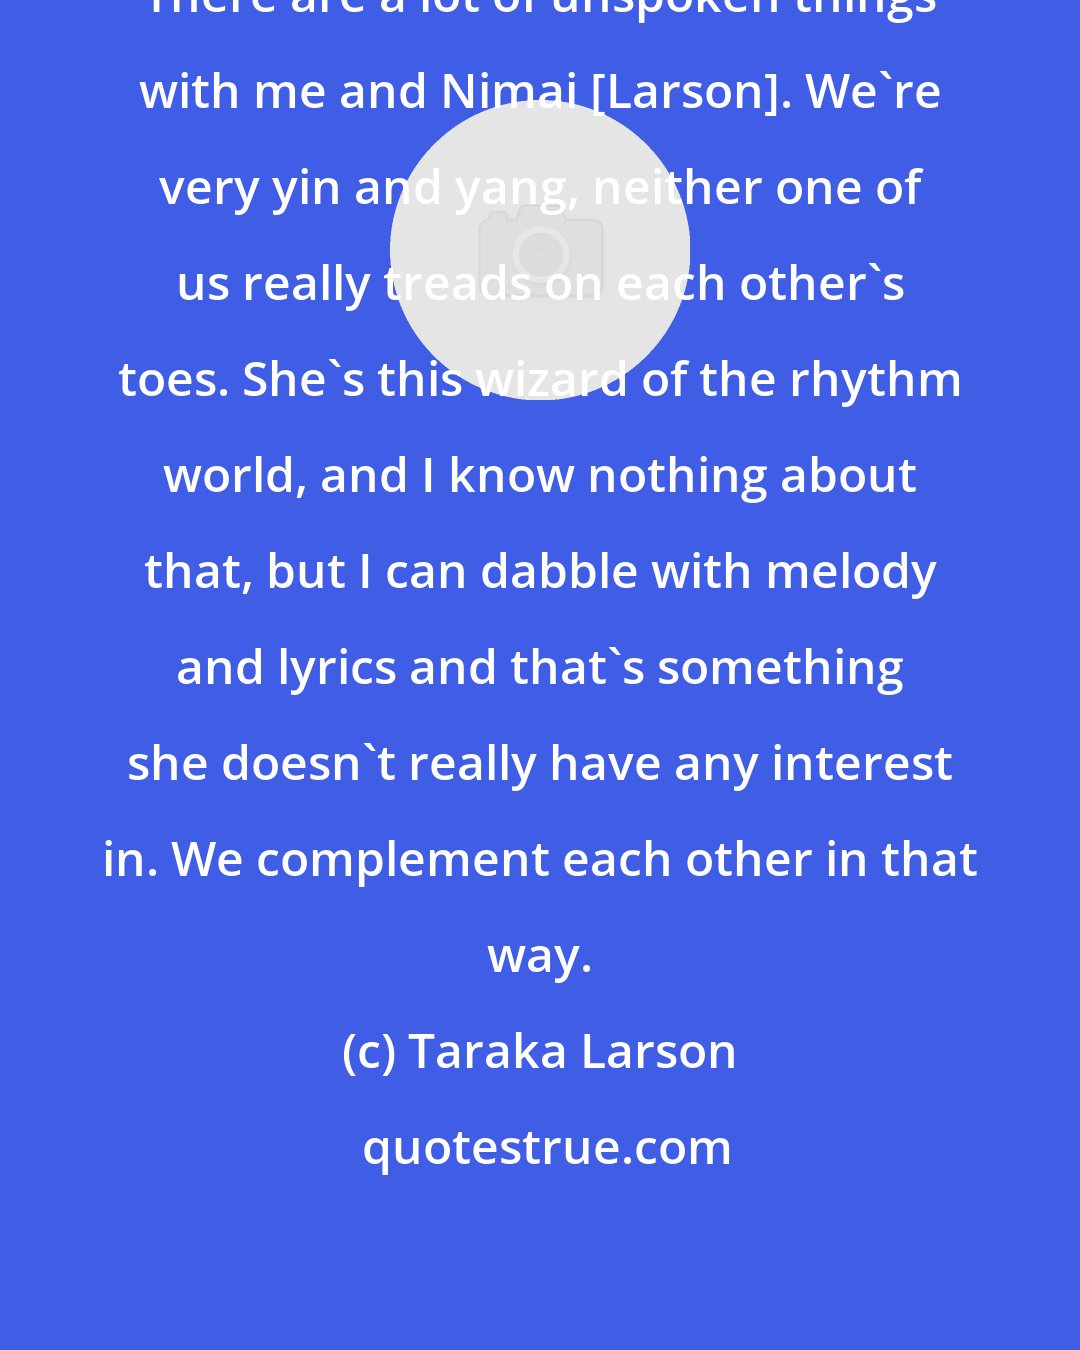 Taraka Larson: There are a lot of unspoken things with me and Nimai [Larson]. We're very yin and yang, neither one of us really treads on each other's toes. She's this wizard of the rhythm world, and I know nothing about that, but I can dabble with melody and lyrics and that's something she doesn't really have any interest in. We complement each other in that way.